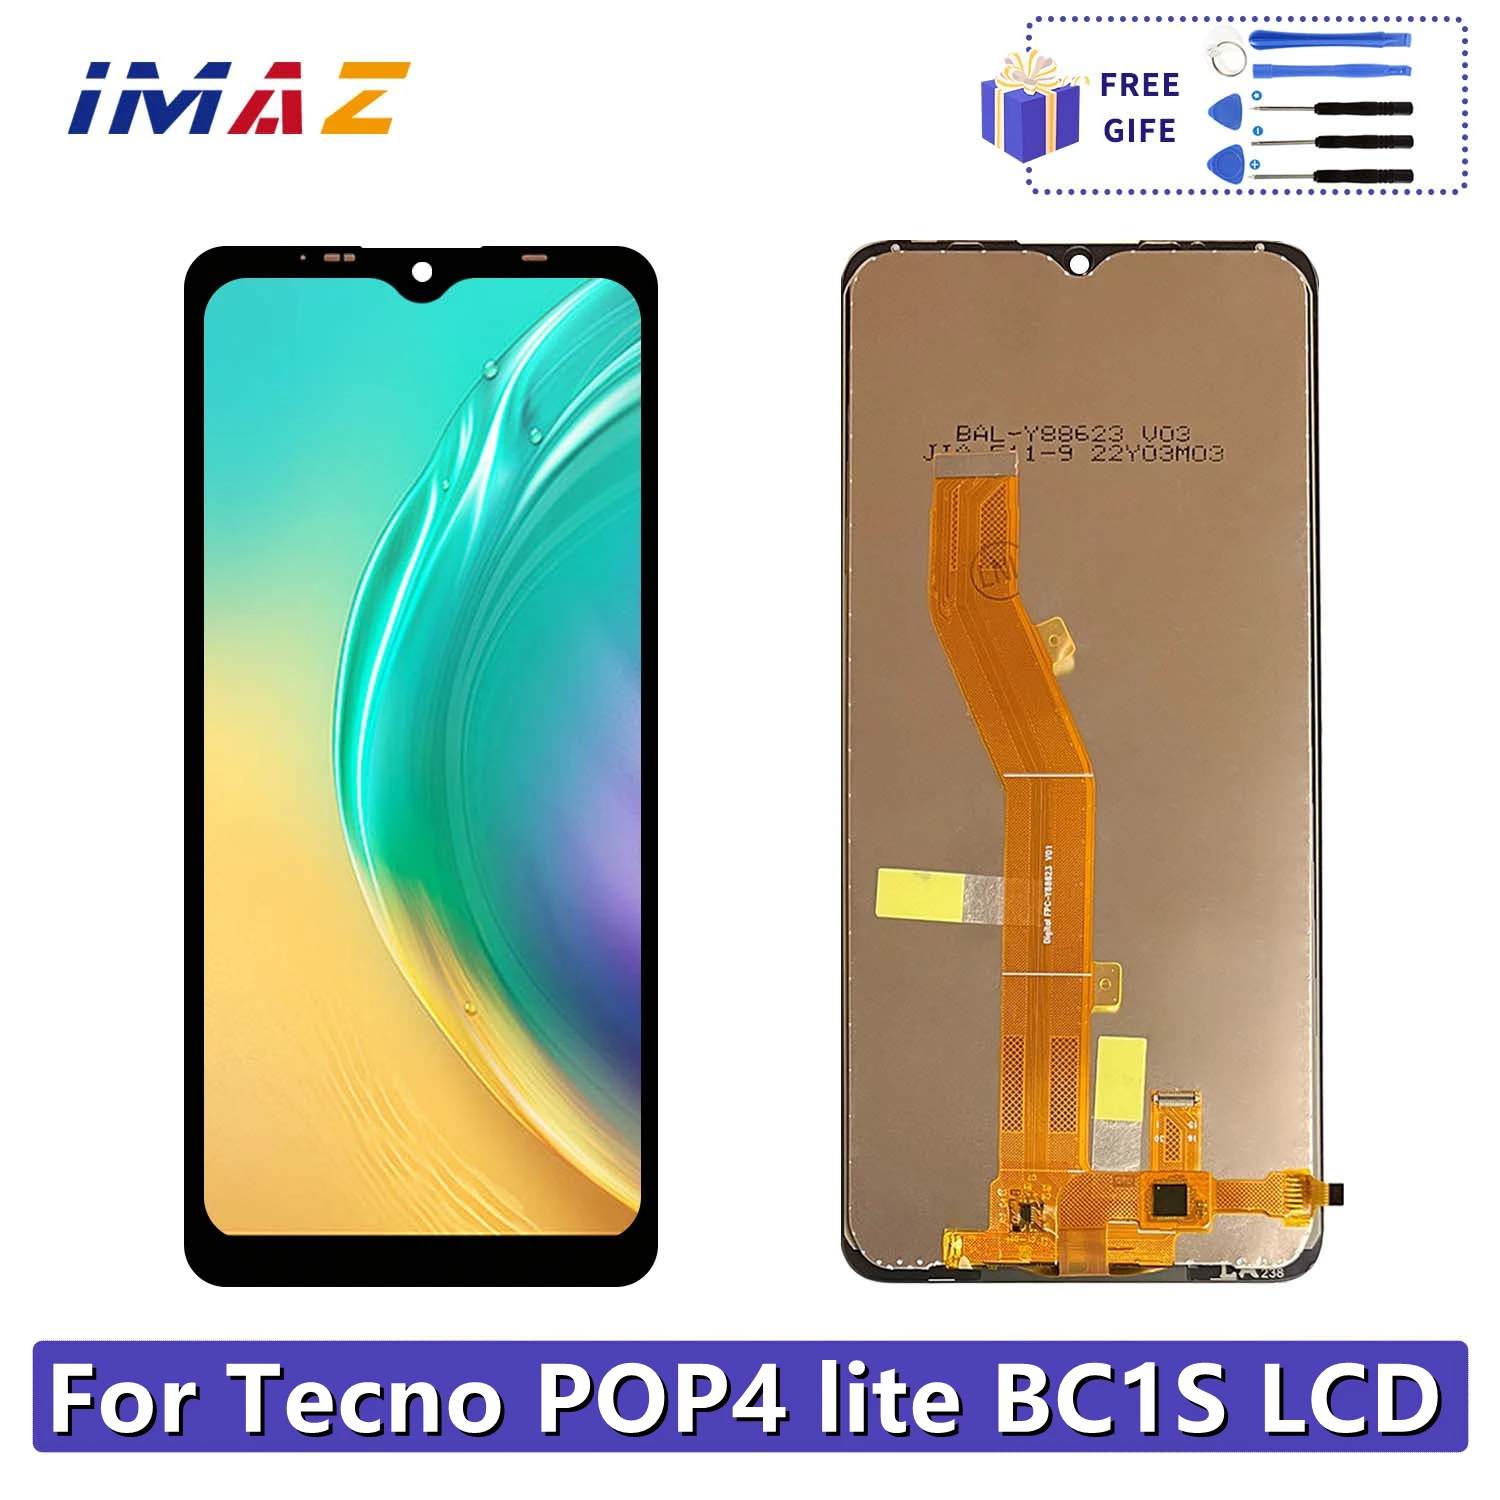 

For Infinix Tecno Pop 4 Lite BC1S LCD Display Touch Screen Digitizer Assembly For Infinix Pop4 Lite BC1S LCD Repair Replacement